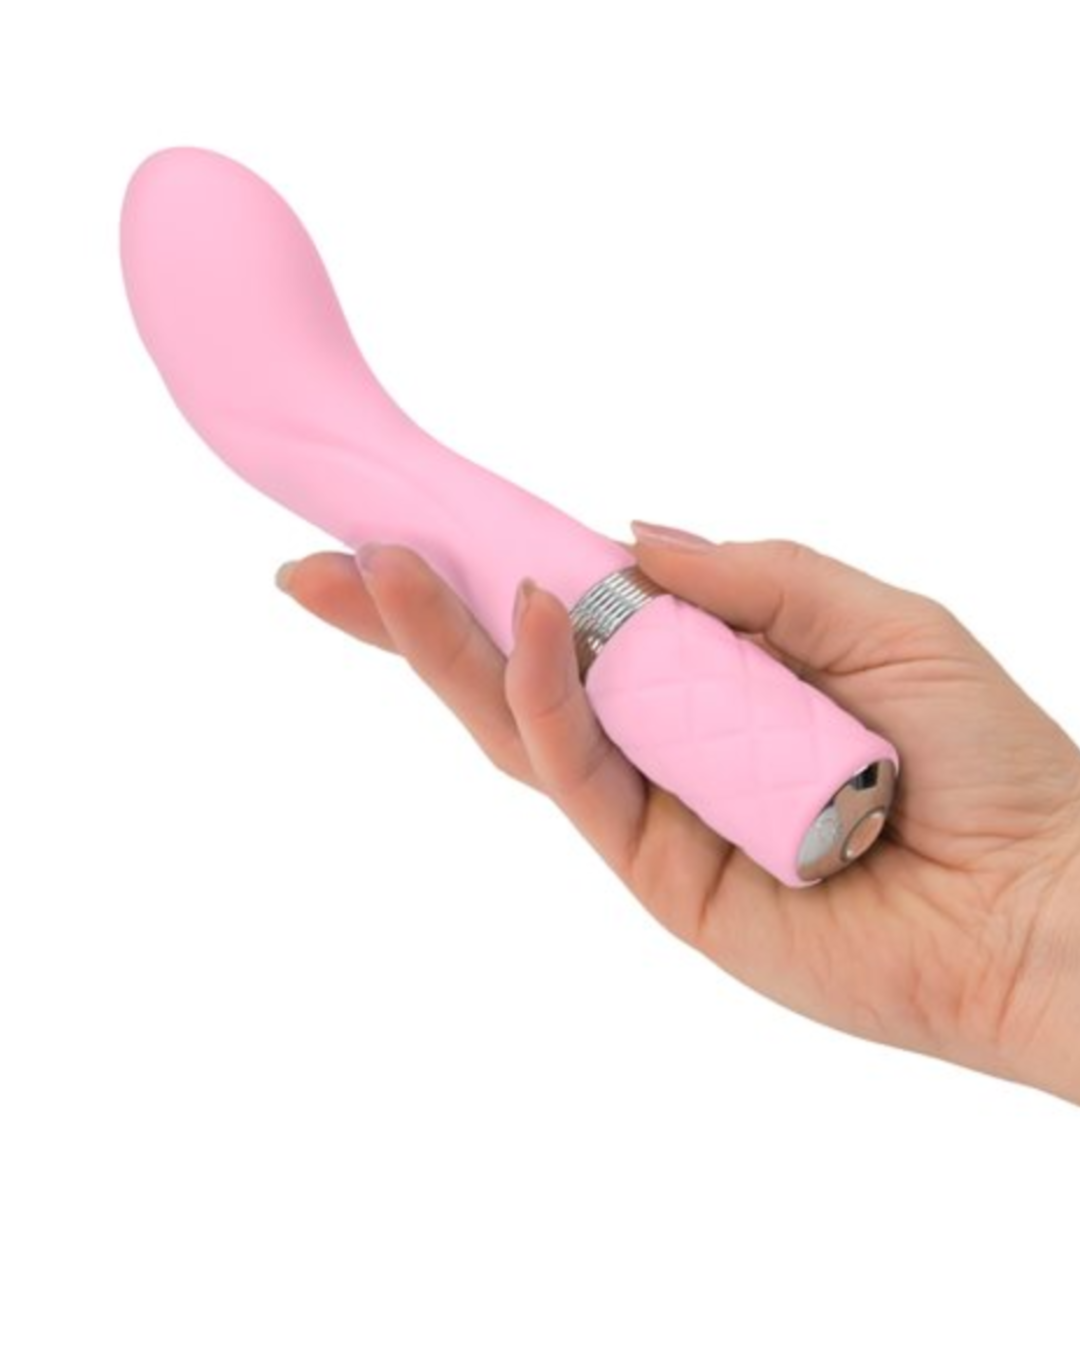 Pillow Talk Sassy G-spot Vibrator by BMS - Pink held in a hand